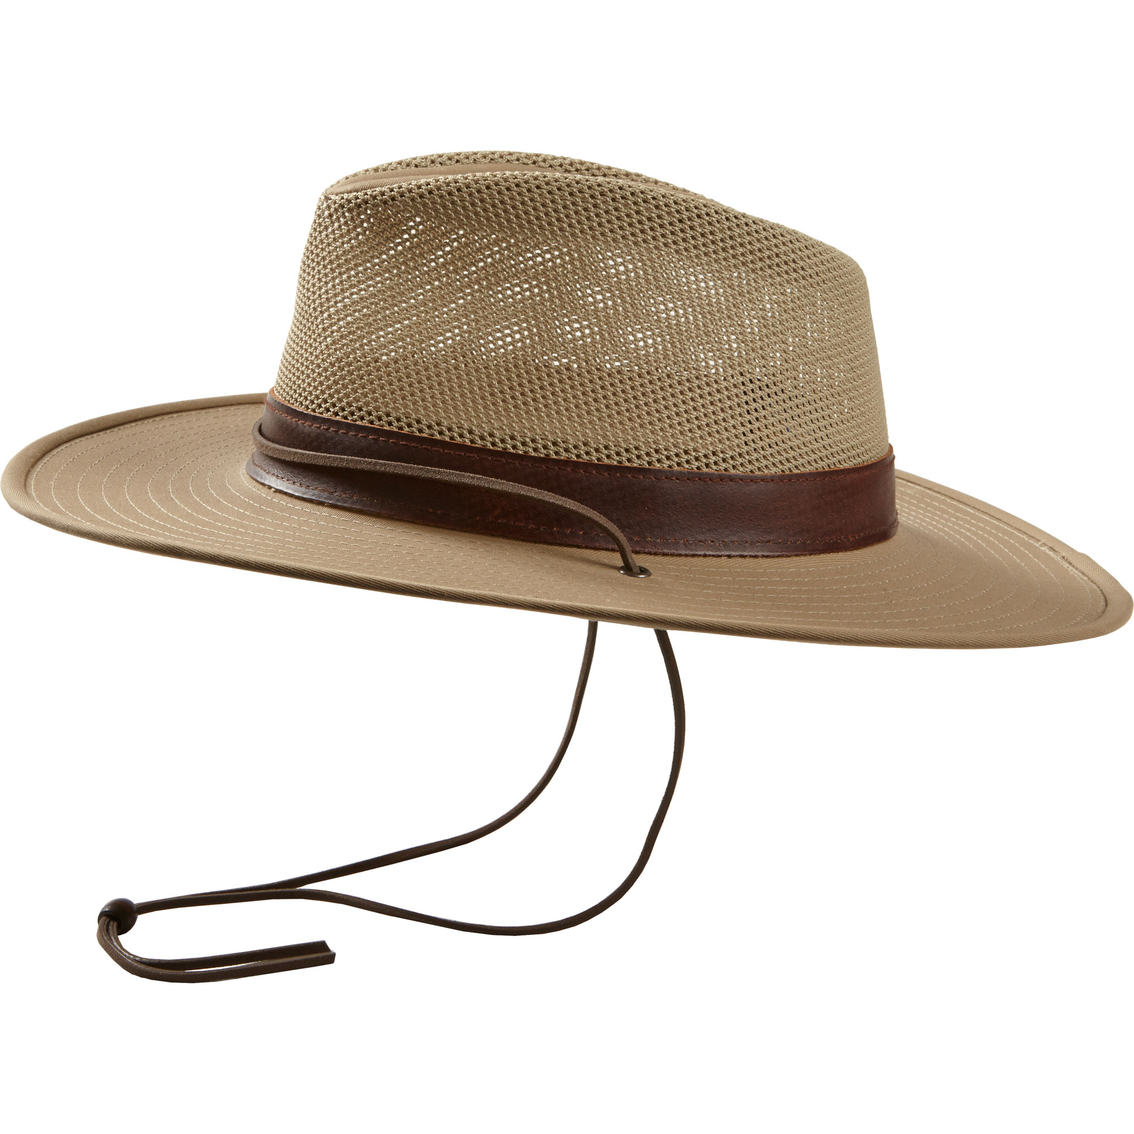 Henschel Hats Hiker Hat With Leather Band | Hats & Visors | Clothing ...